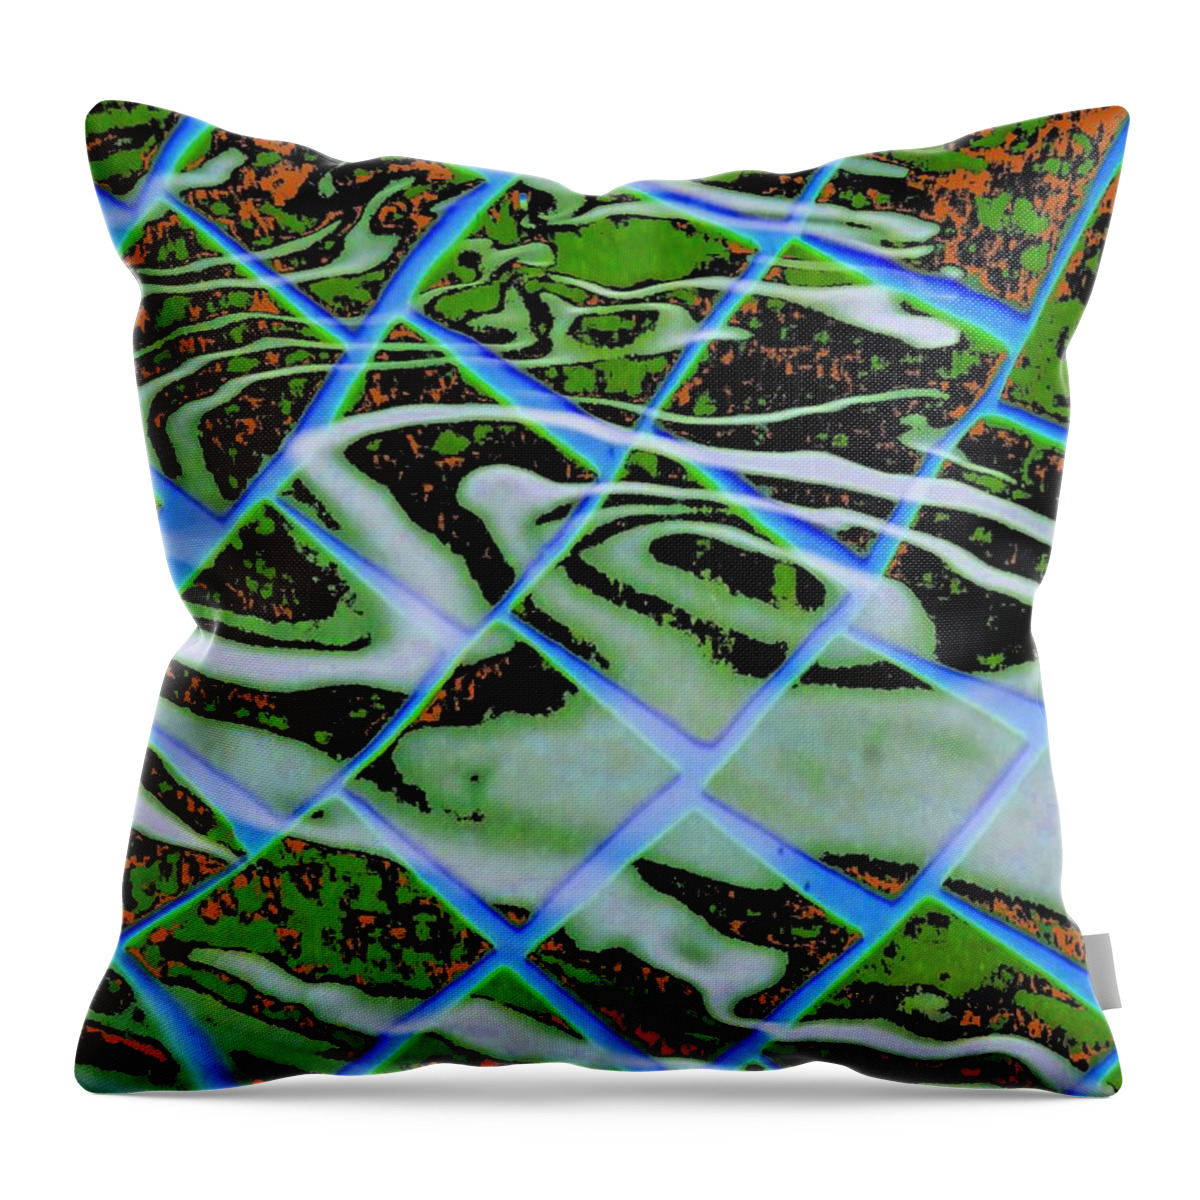 Abstract Throw Pillow featuring the digital art Abstract Expressionaryish 20 by T Oliver